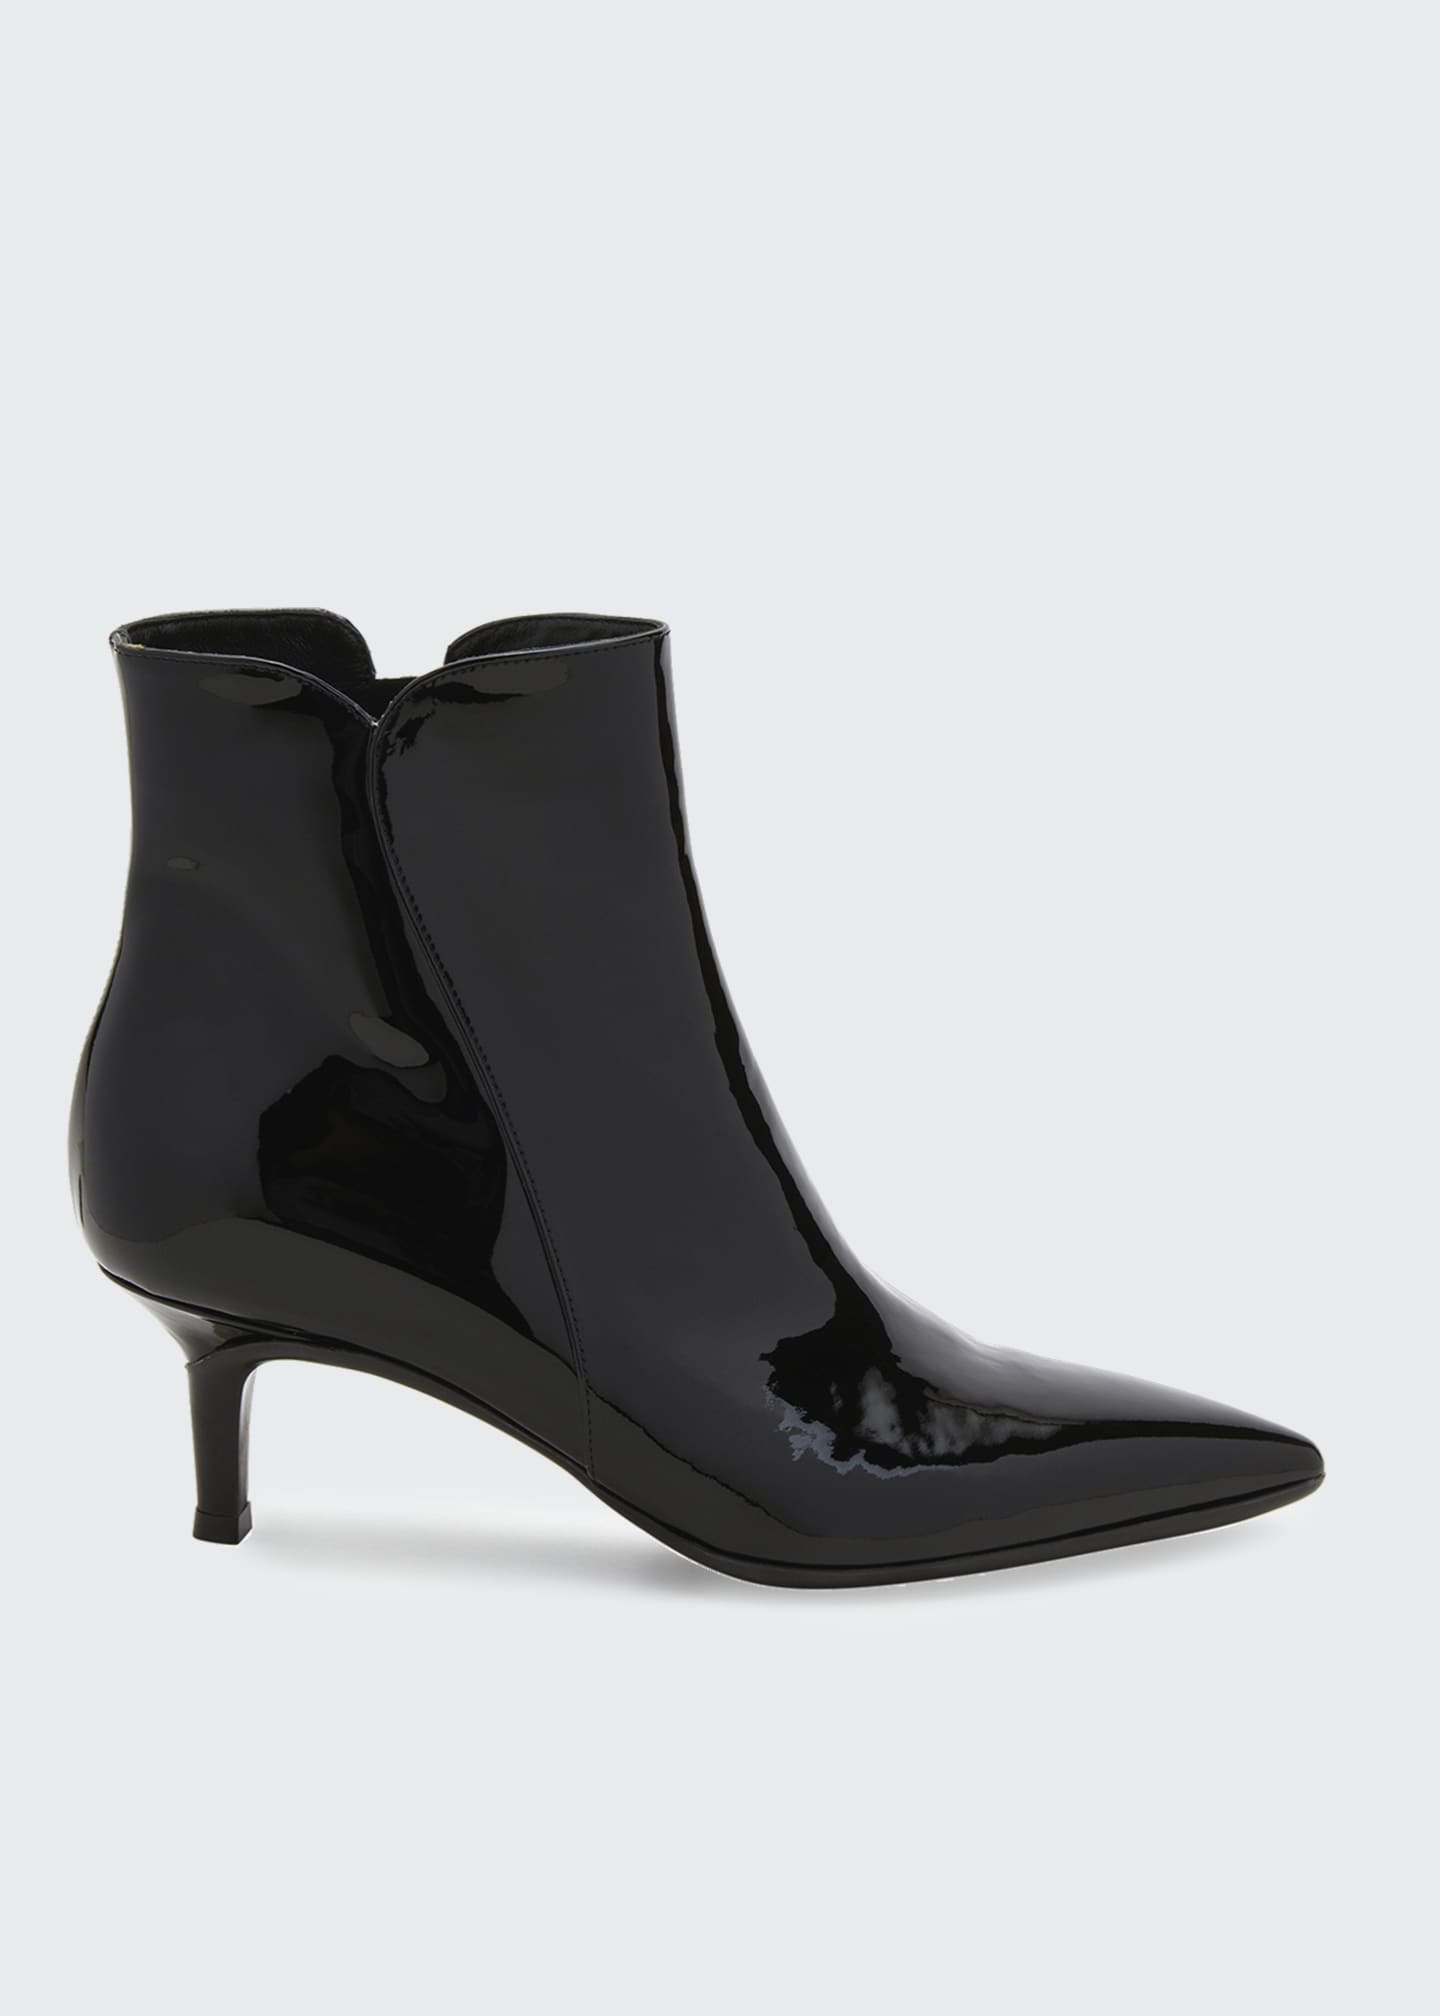 Gianvito Rossi Patent Leather Pointed Zip Booties - Bergdorf Goodman